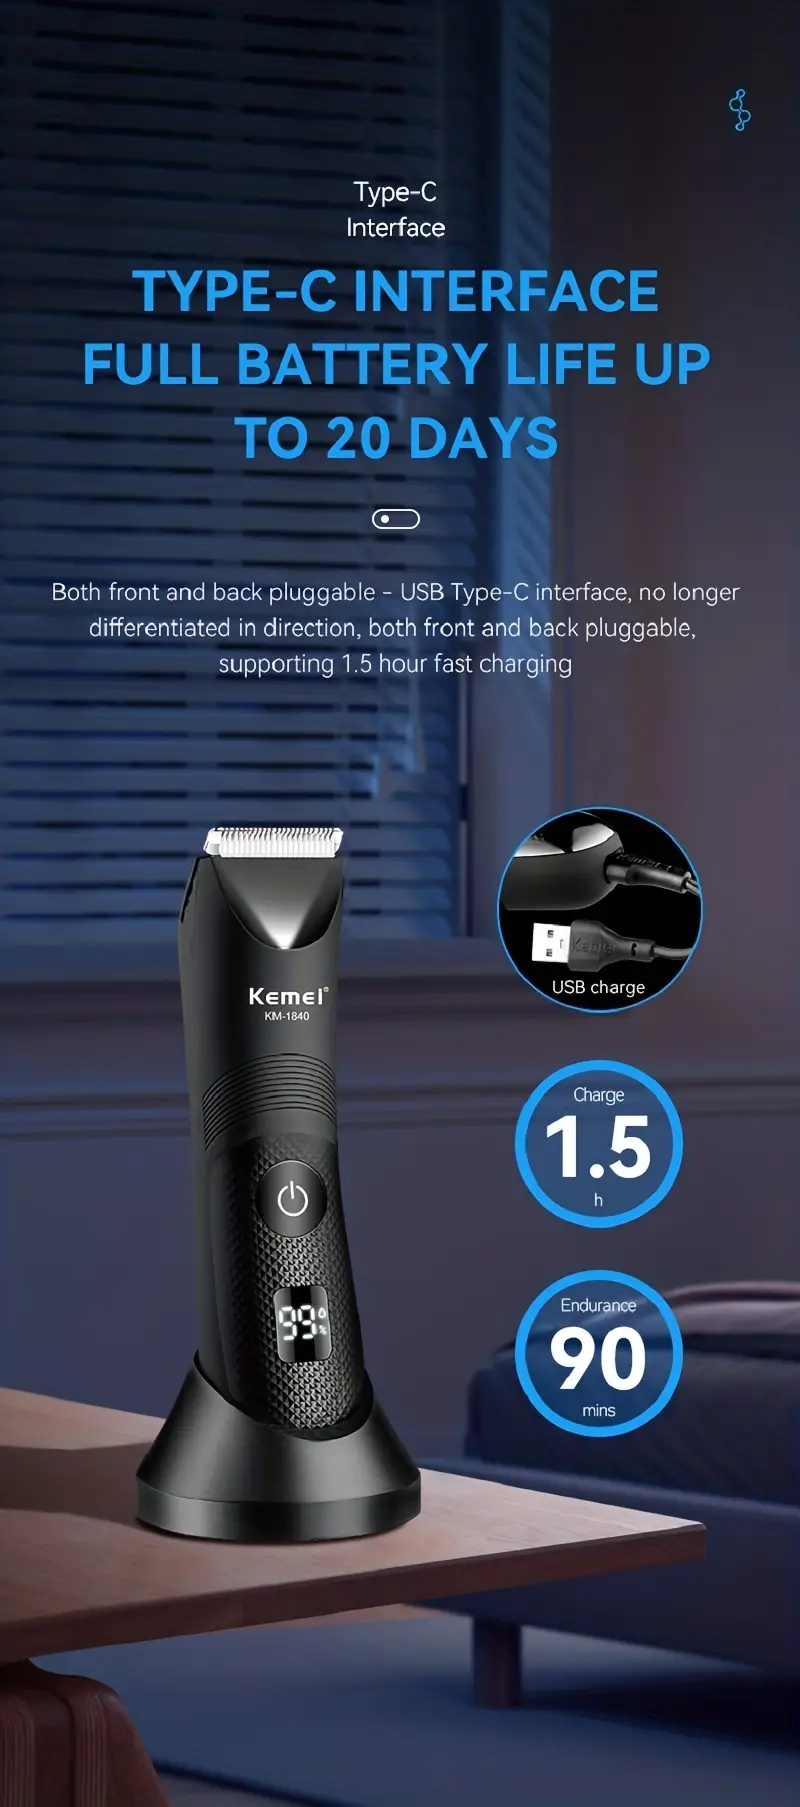 kemei body groin hair trimmer for men replaceable ceramic blade heads waterproof wet dry clippers led light and standing dock ultimate male hygiene razor and electric body shavers for balls details 6